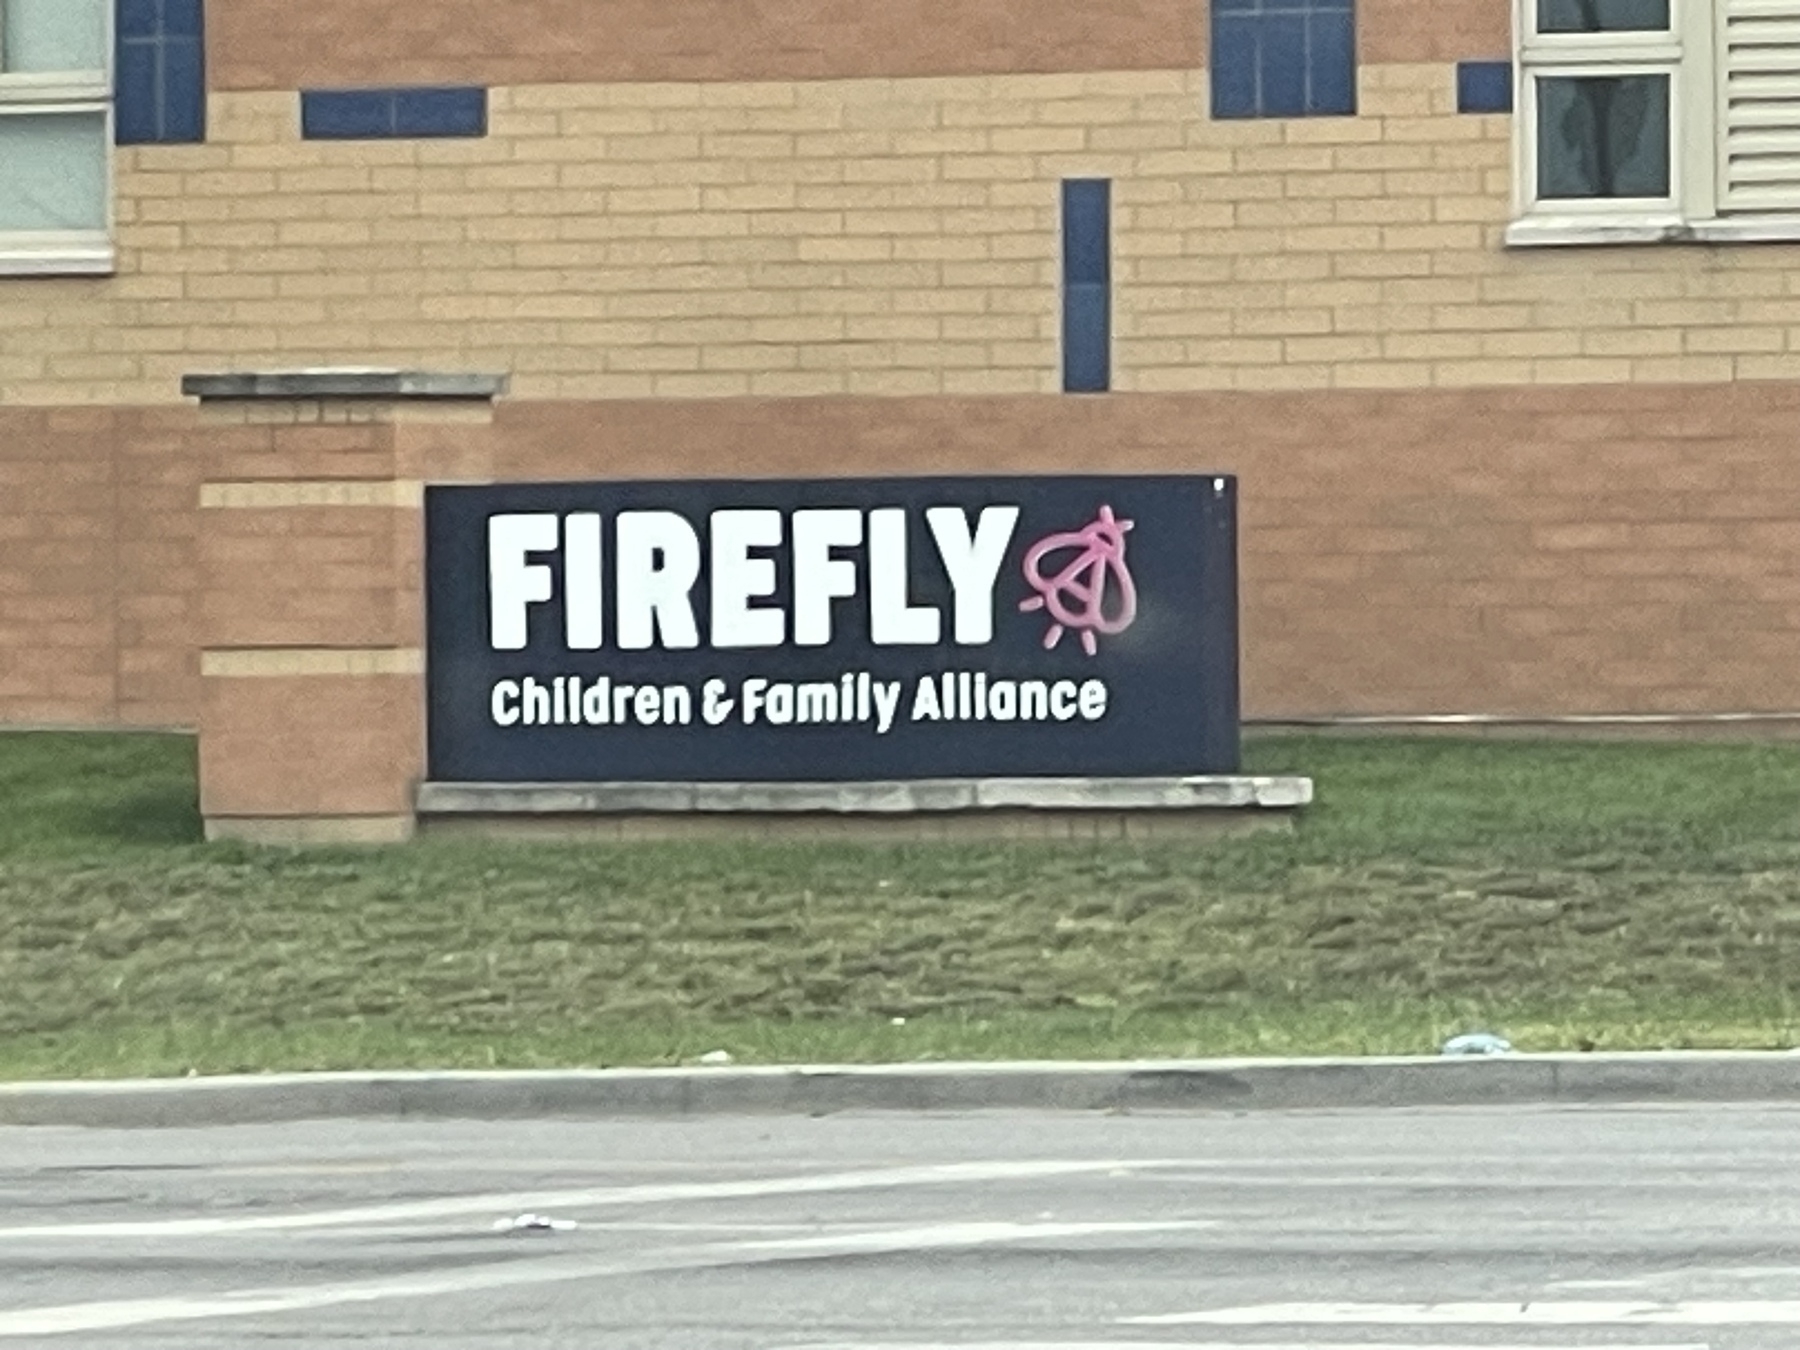 “Firefly Children & Family Alliance” with a firefly logo that looks like it has a circle-A in it